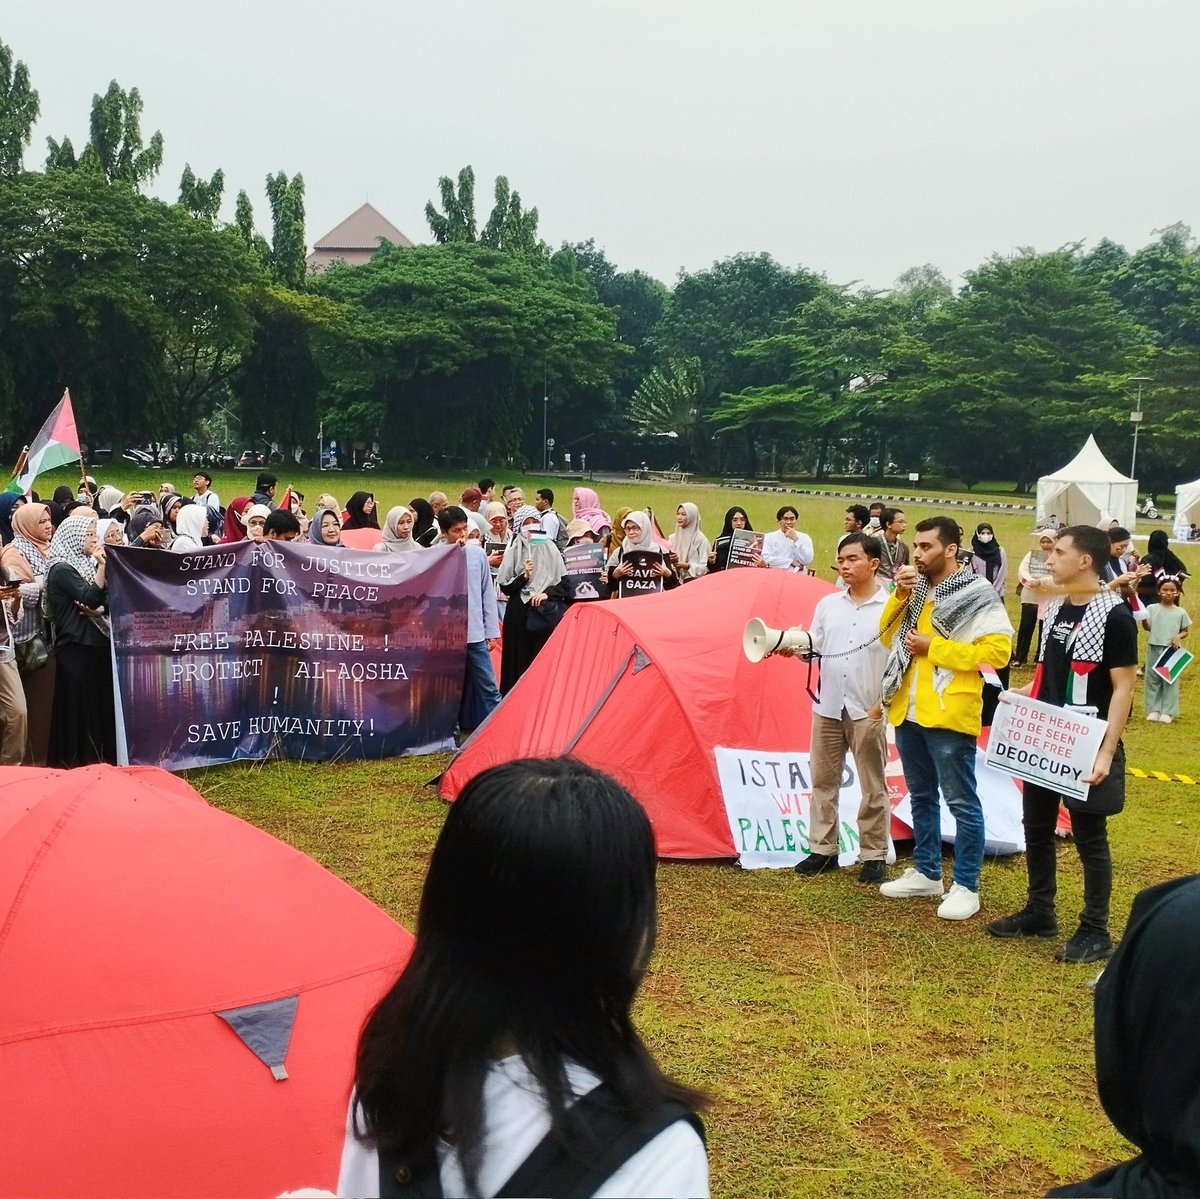 Today, hundreds of @univ_indonesia students gather in solidarity with Palestine and the global student movement, where Palestinian youth voices are also involved. It's one of MANY demonstrations by Indonesians fighting against illegal occupation and injustice toward Palestinians